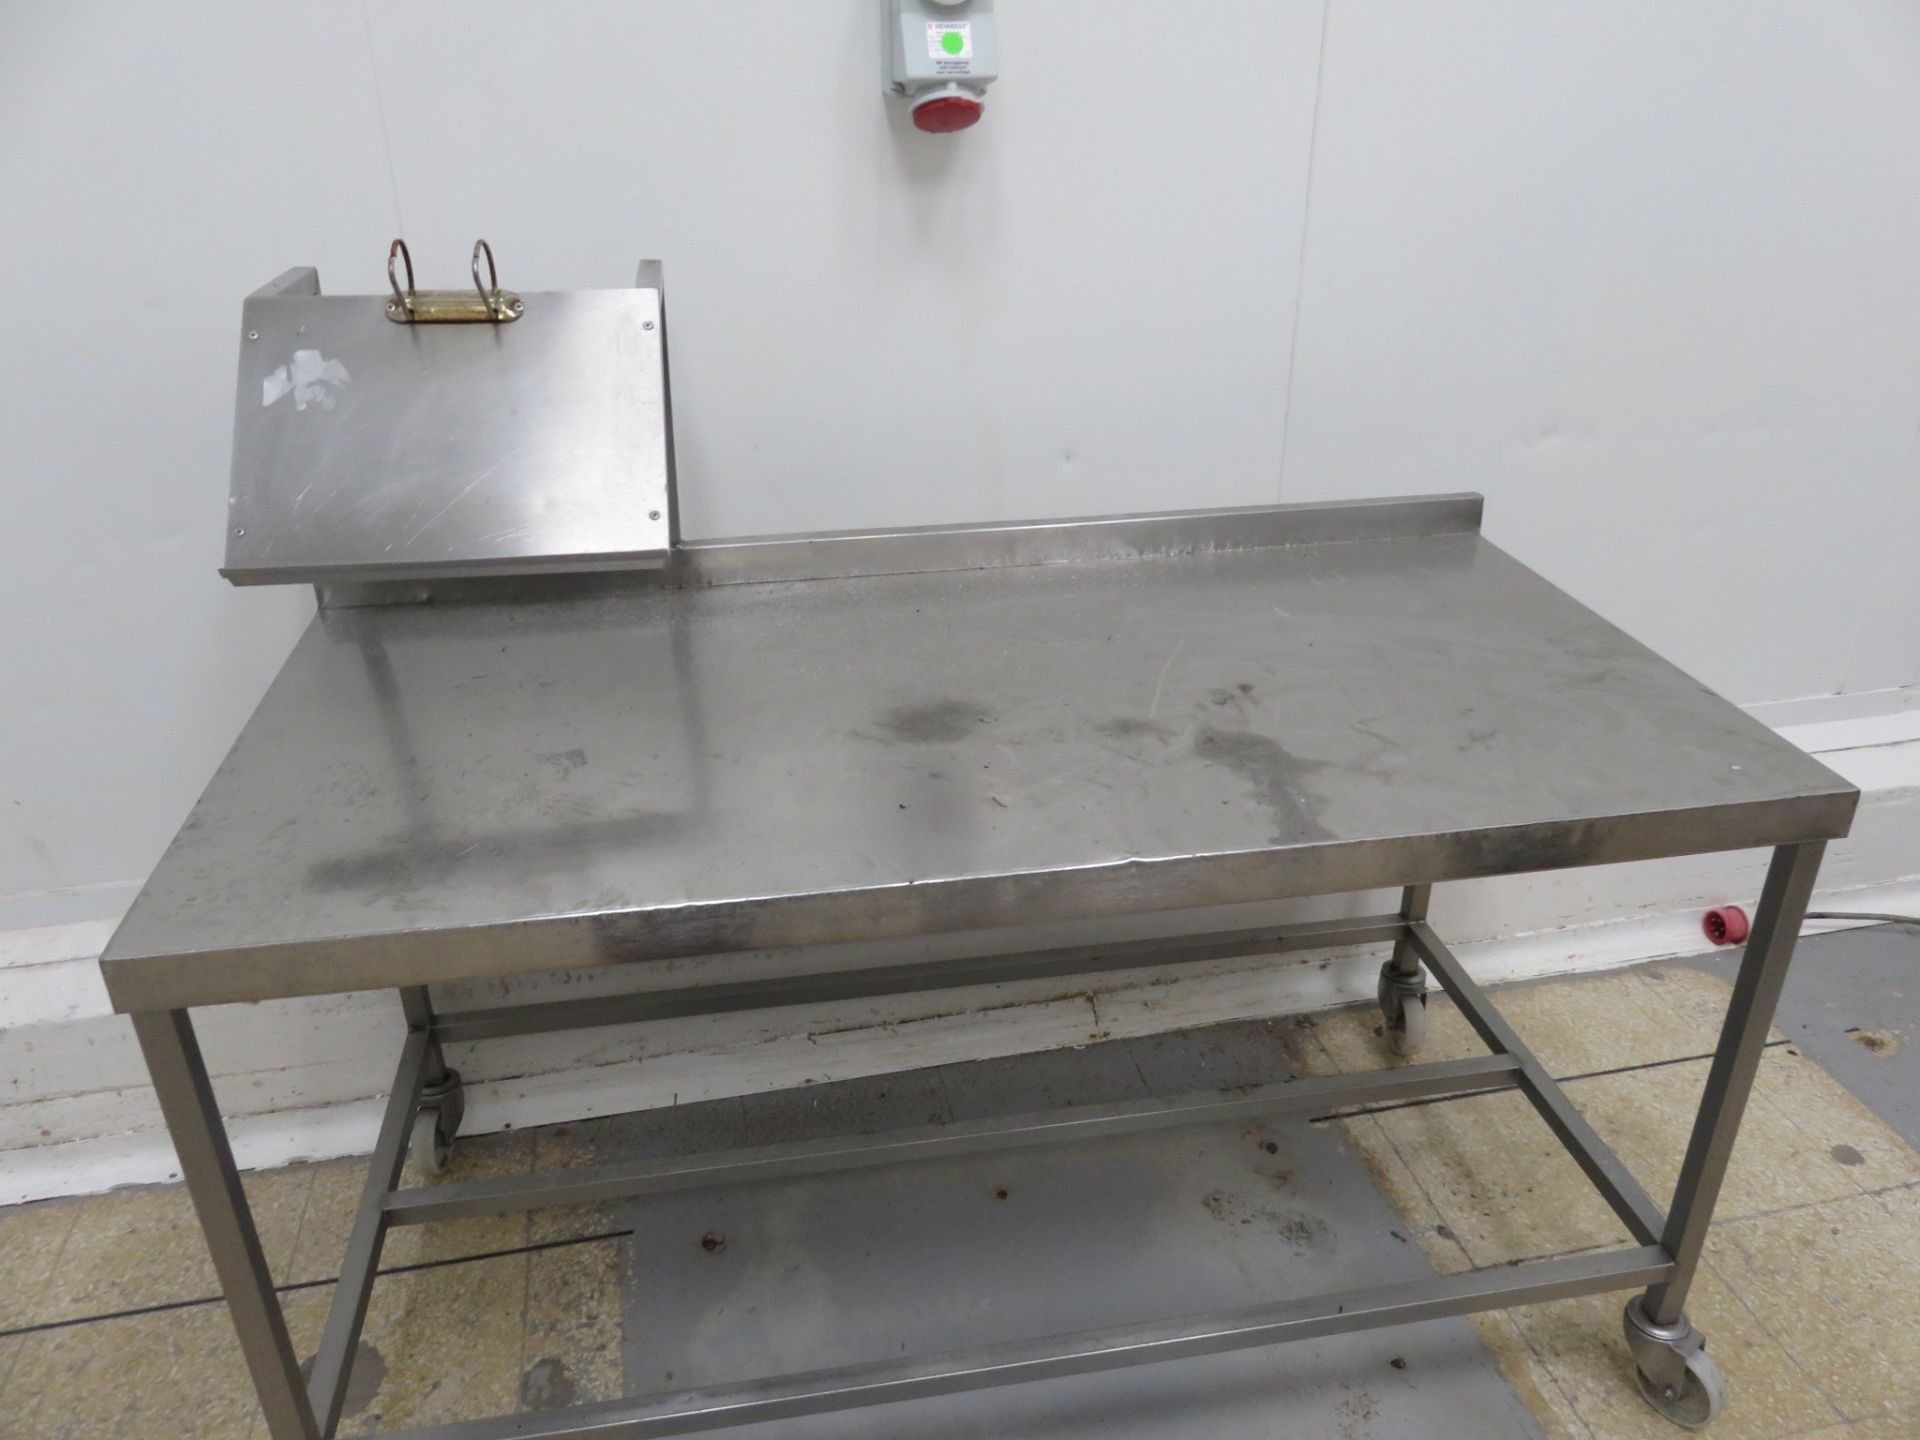 Stainless Steel Table .1.5 metres long x 800mm wide. Lift out £15